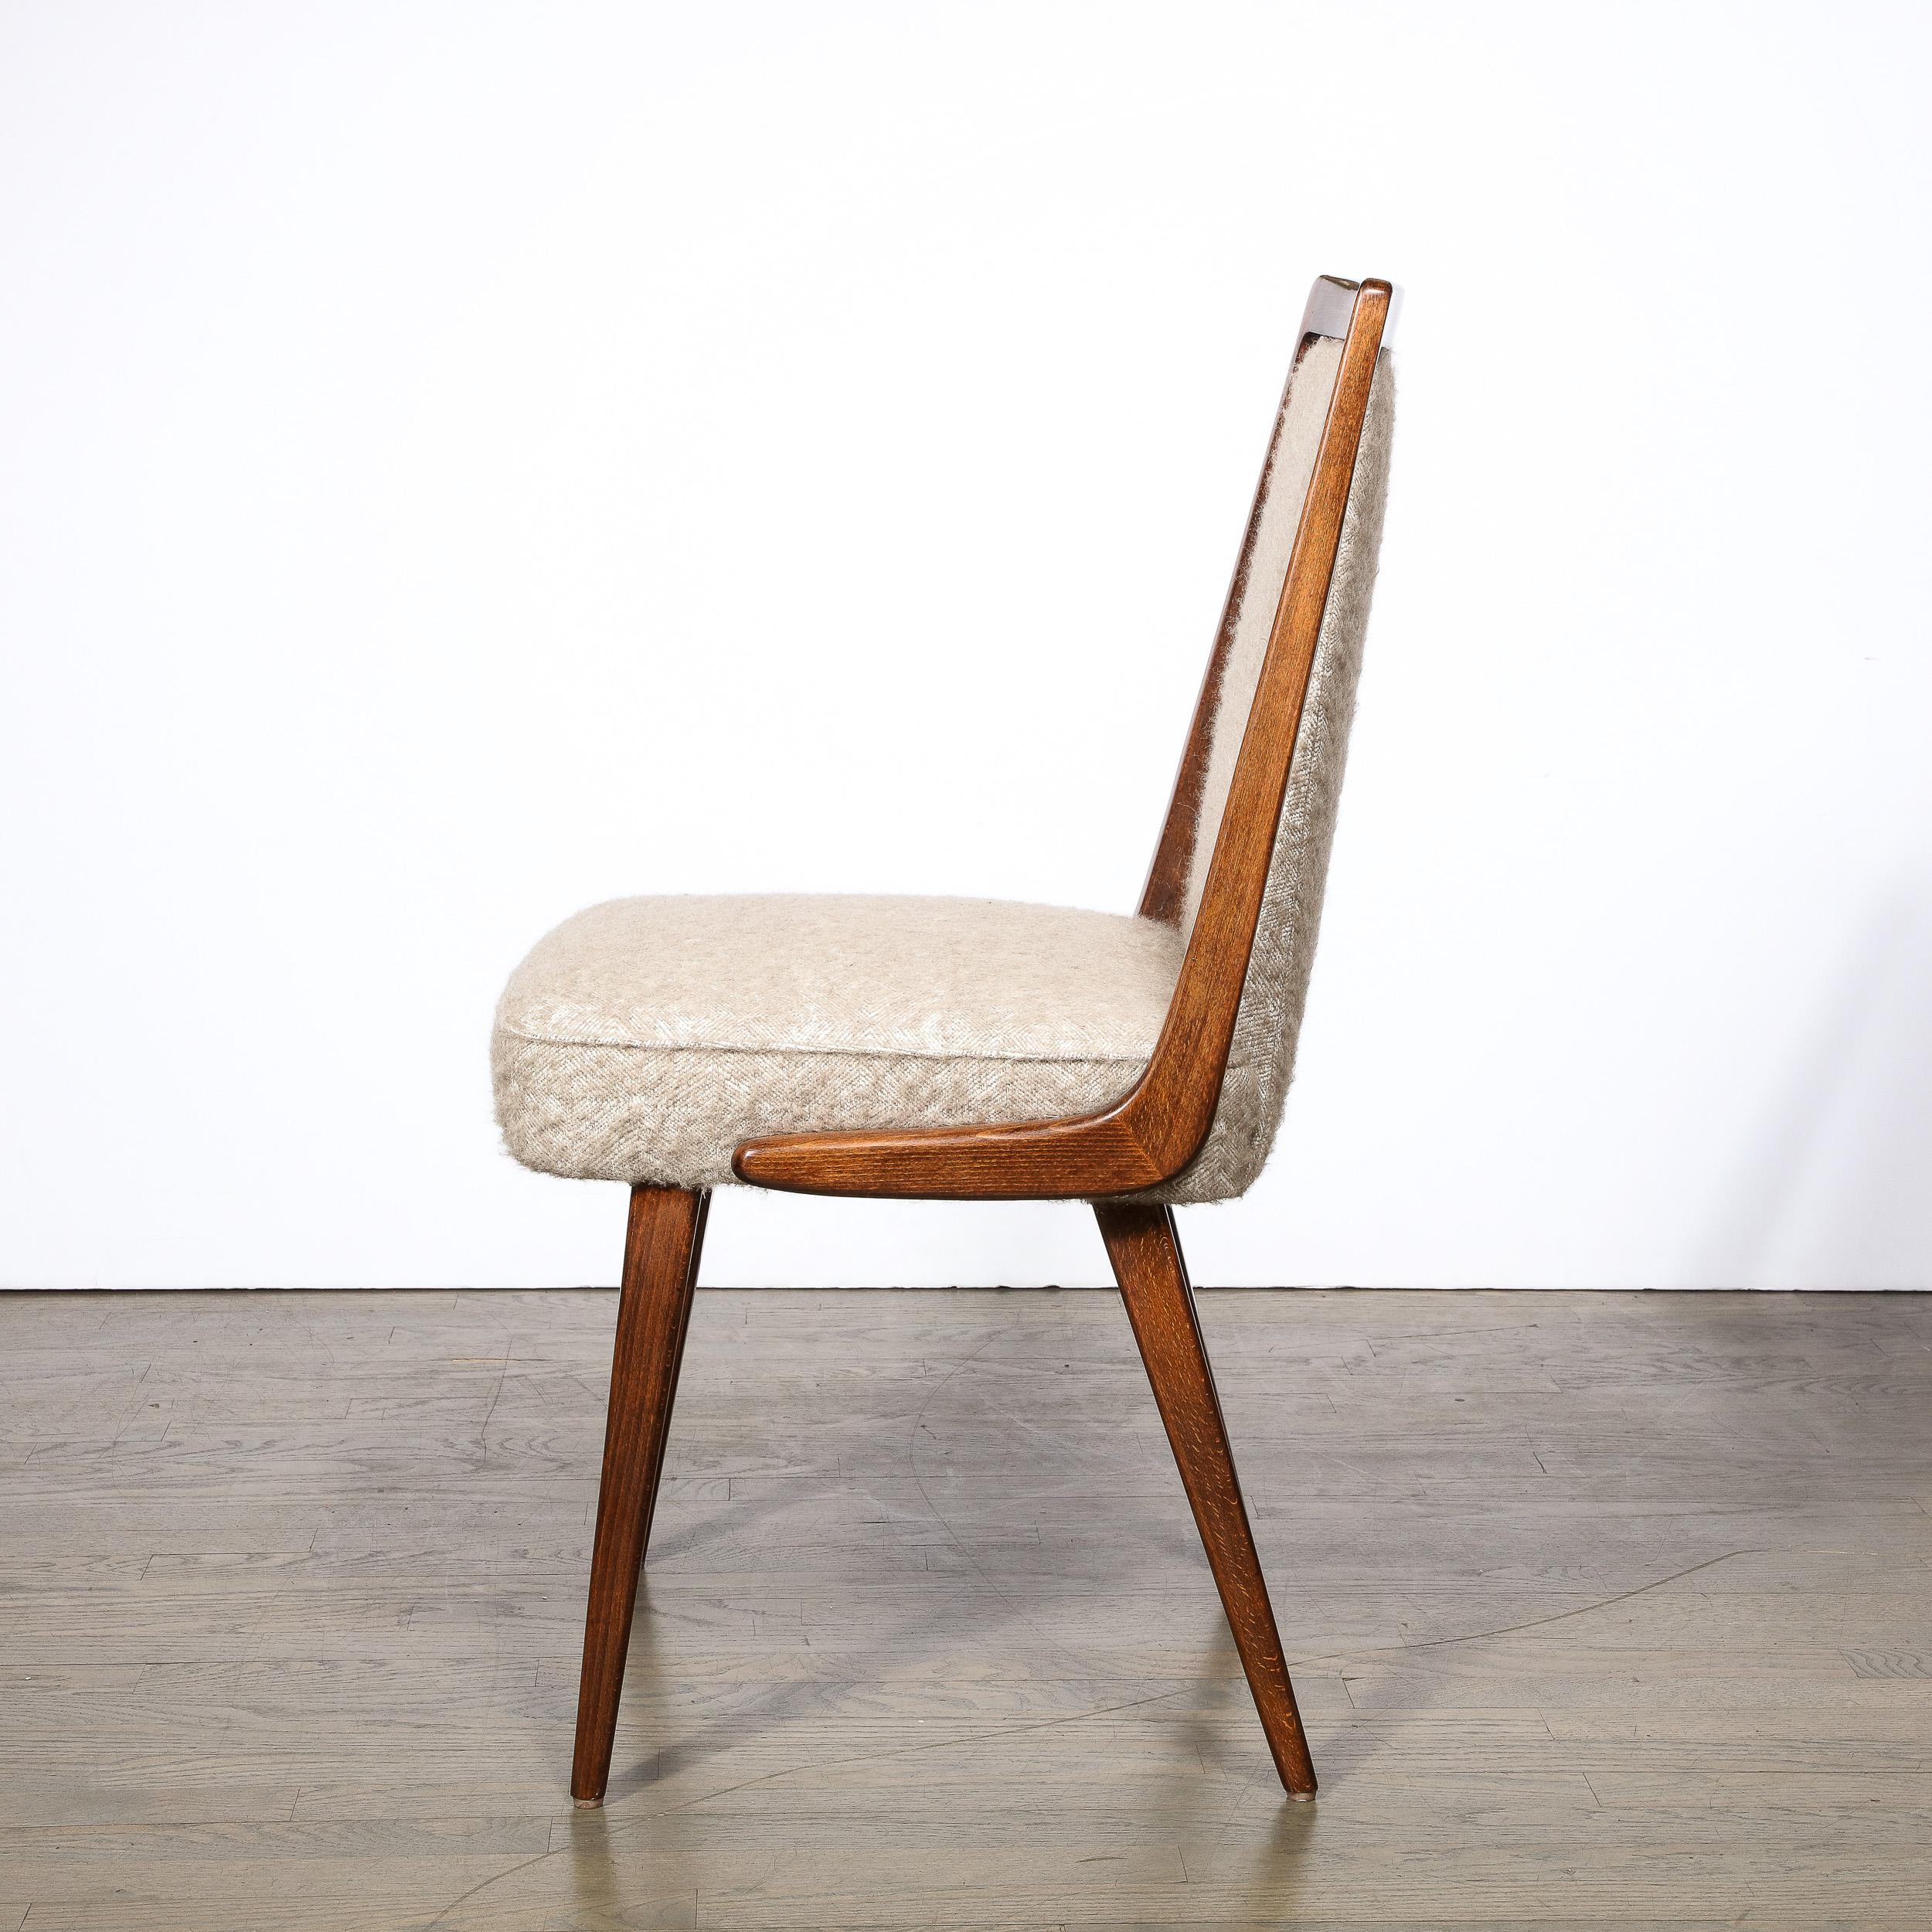 Mid-20th Century Midcentury Modernist Sculptural Frame Back Chair in Walnut & Holly Hunt Fabric